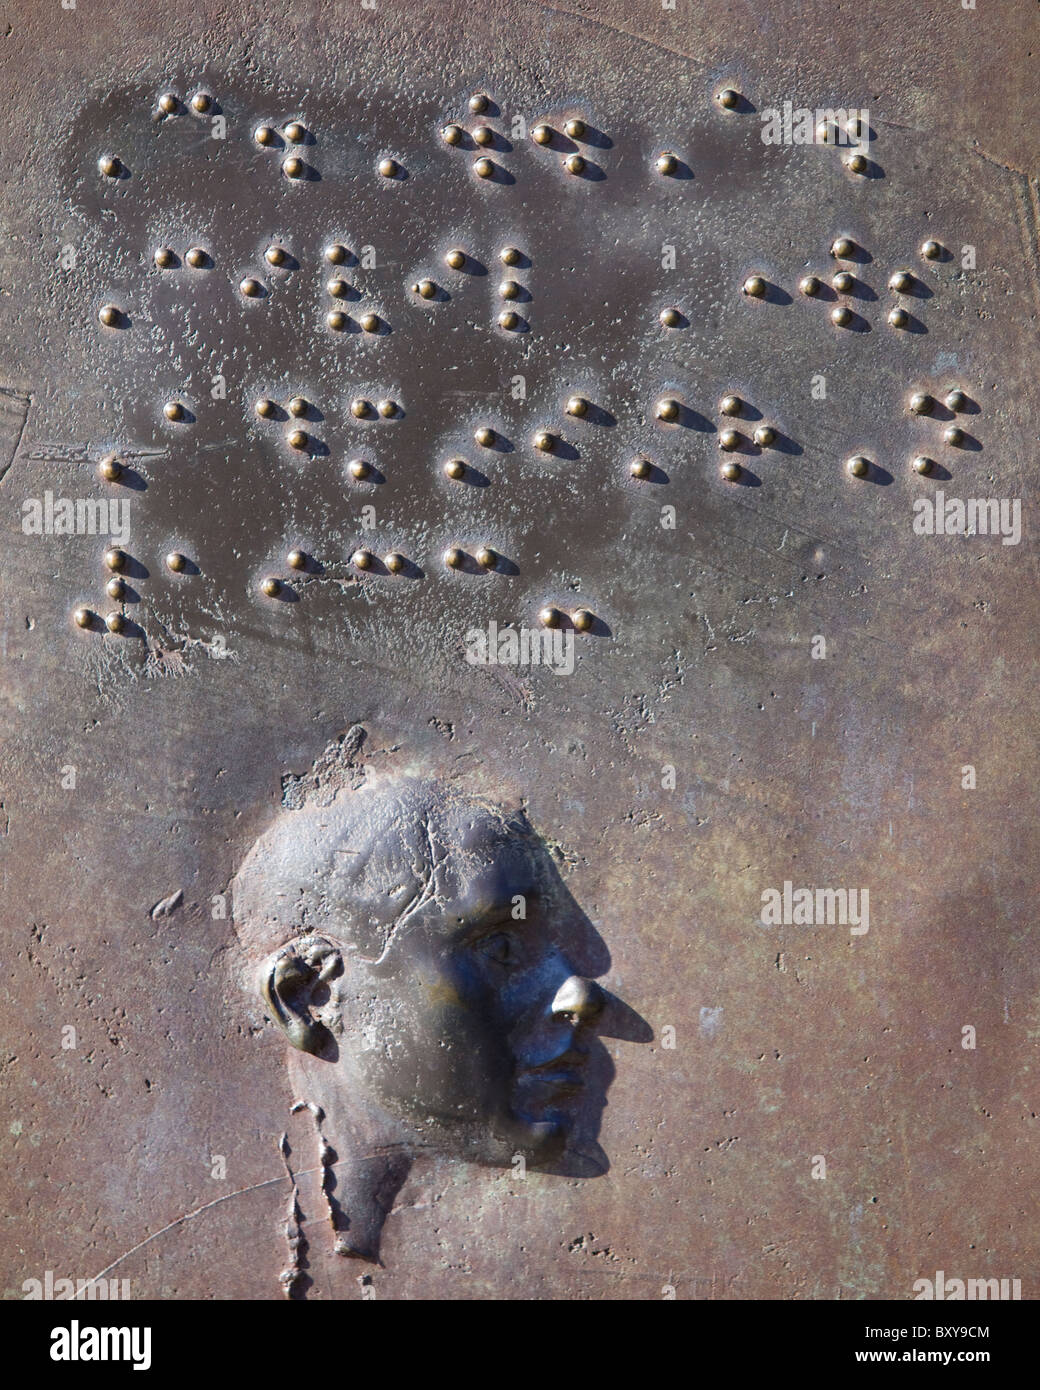 A bronze relief sculpture of braille text and a man's profile Stock Photo